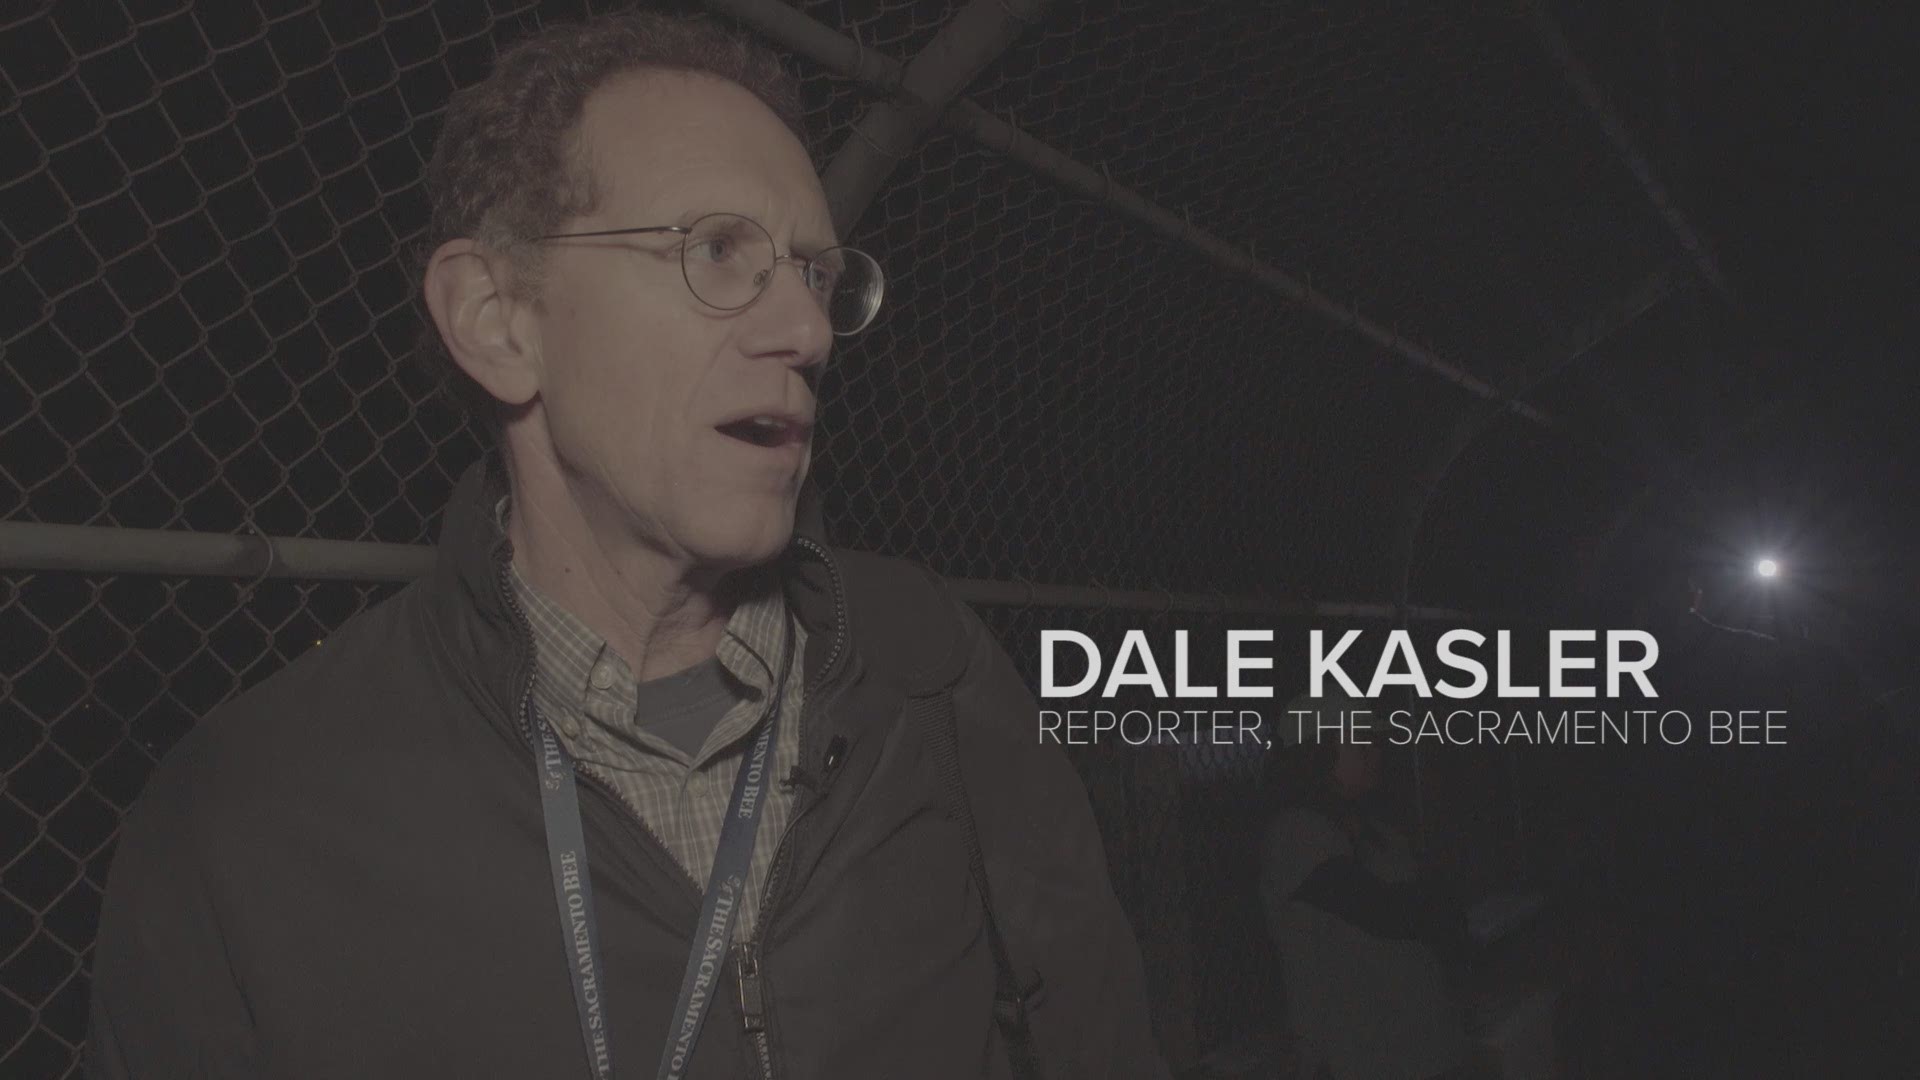 The Sacramento Bee reporter Dale Kasler, who was detained while covering the Stephon Clark protest, talks about what happened.